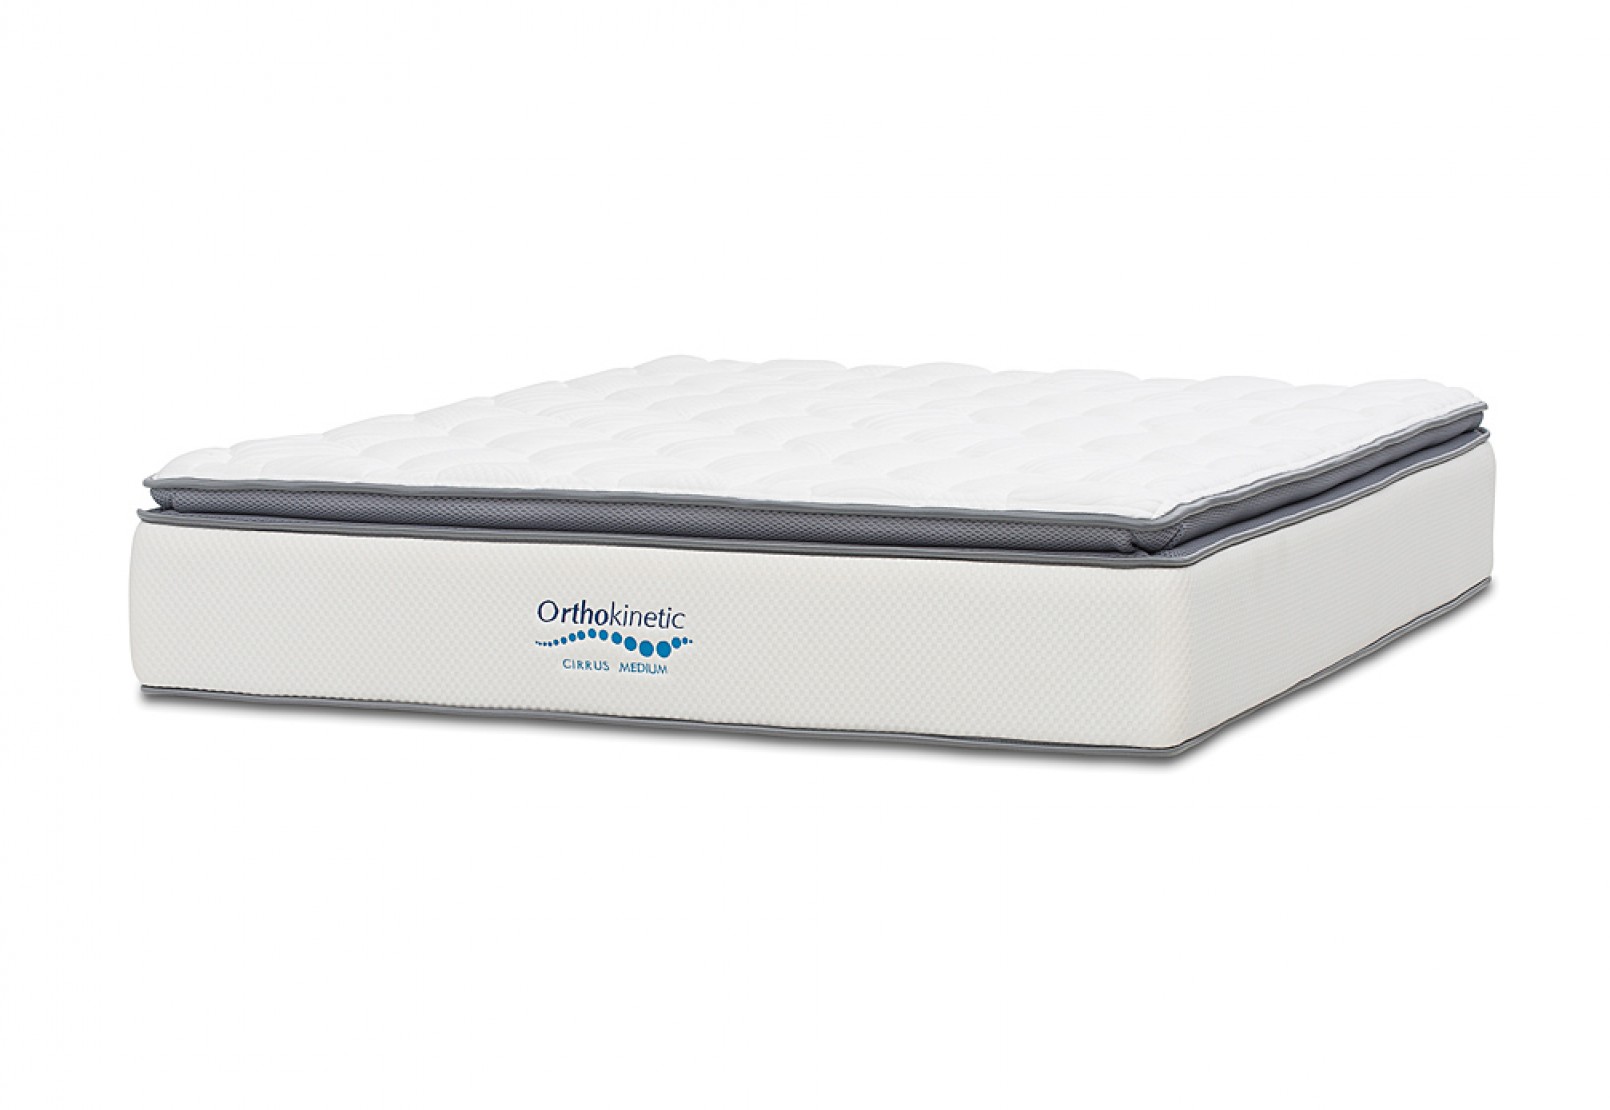 orthokinetic cirrus support mattress review